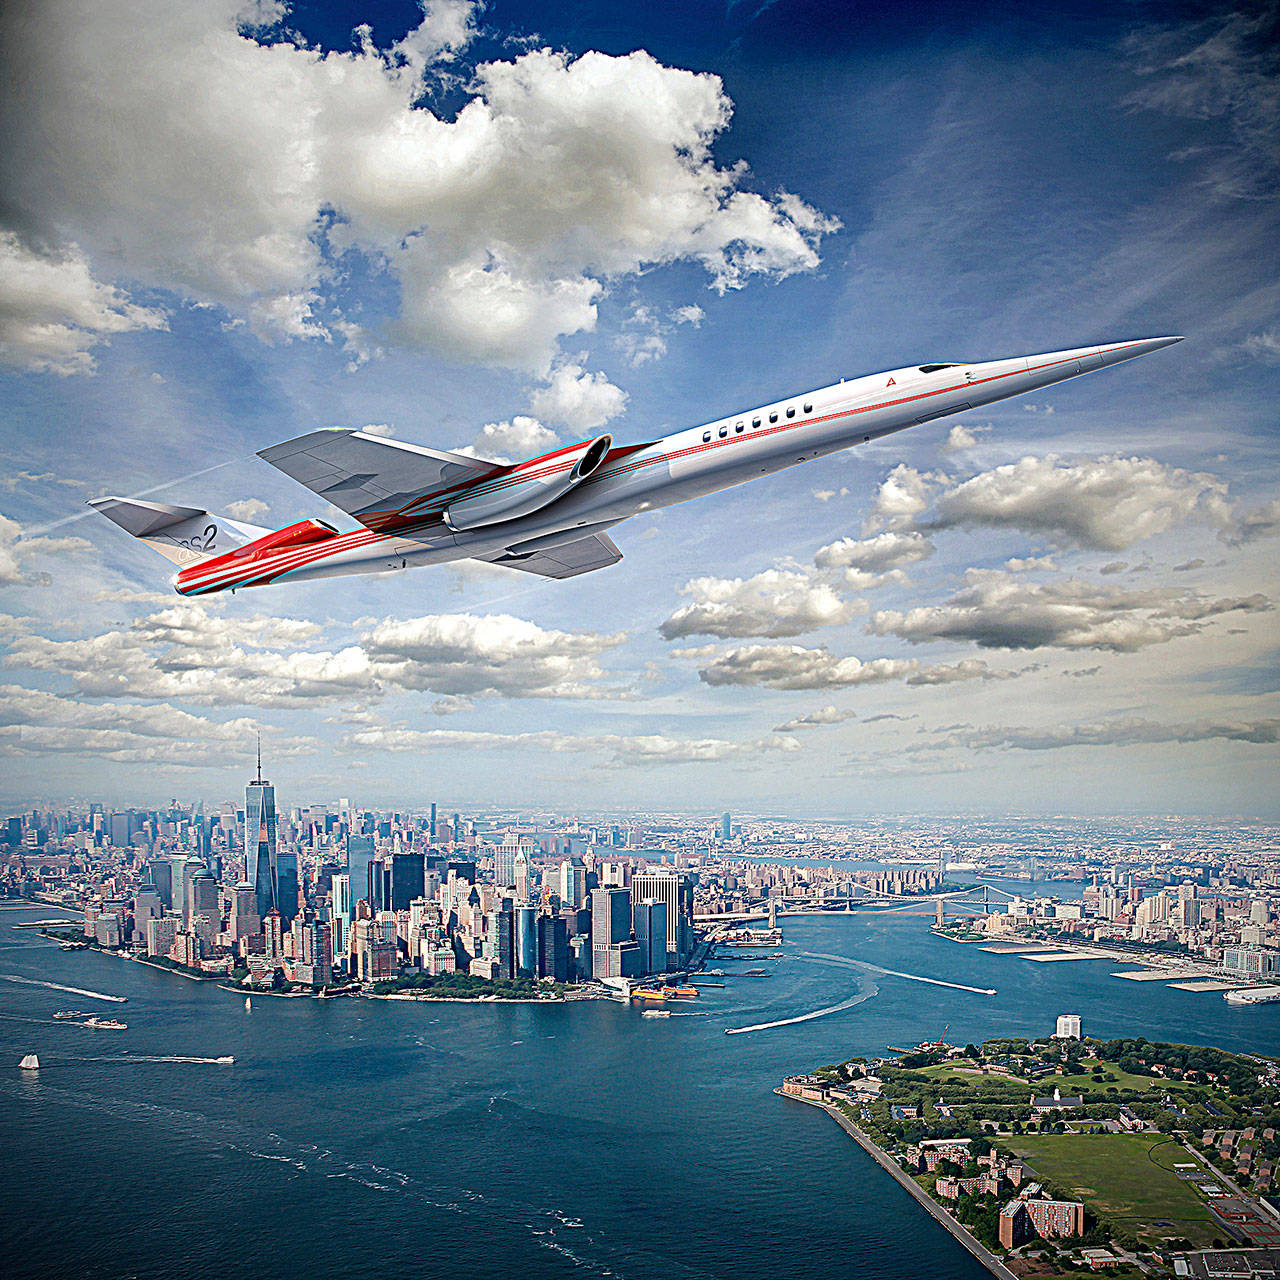 A concept rendering of the Aerion AS2 supersonic business jet, which would carry 10 to 12 passengers at speeds up to Mach 1.4. First flight is planned for 2023 with certification and entry into service in 2025. (Aerion)